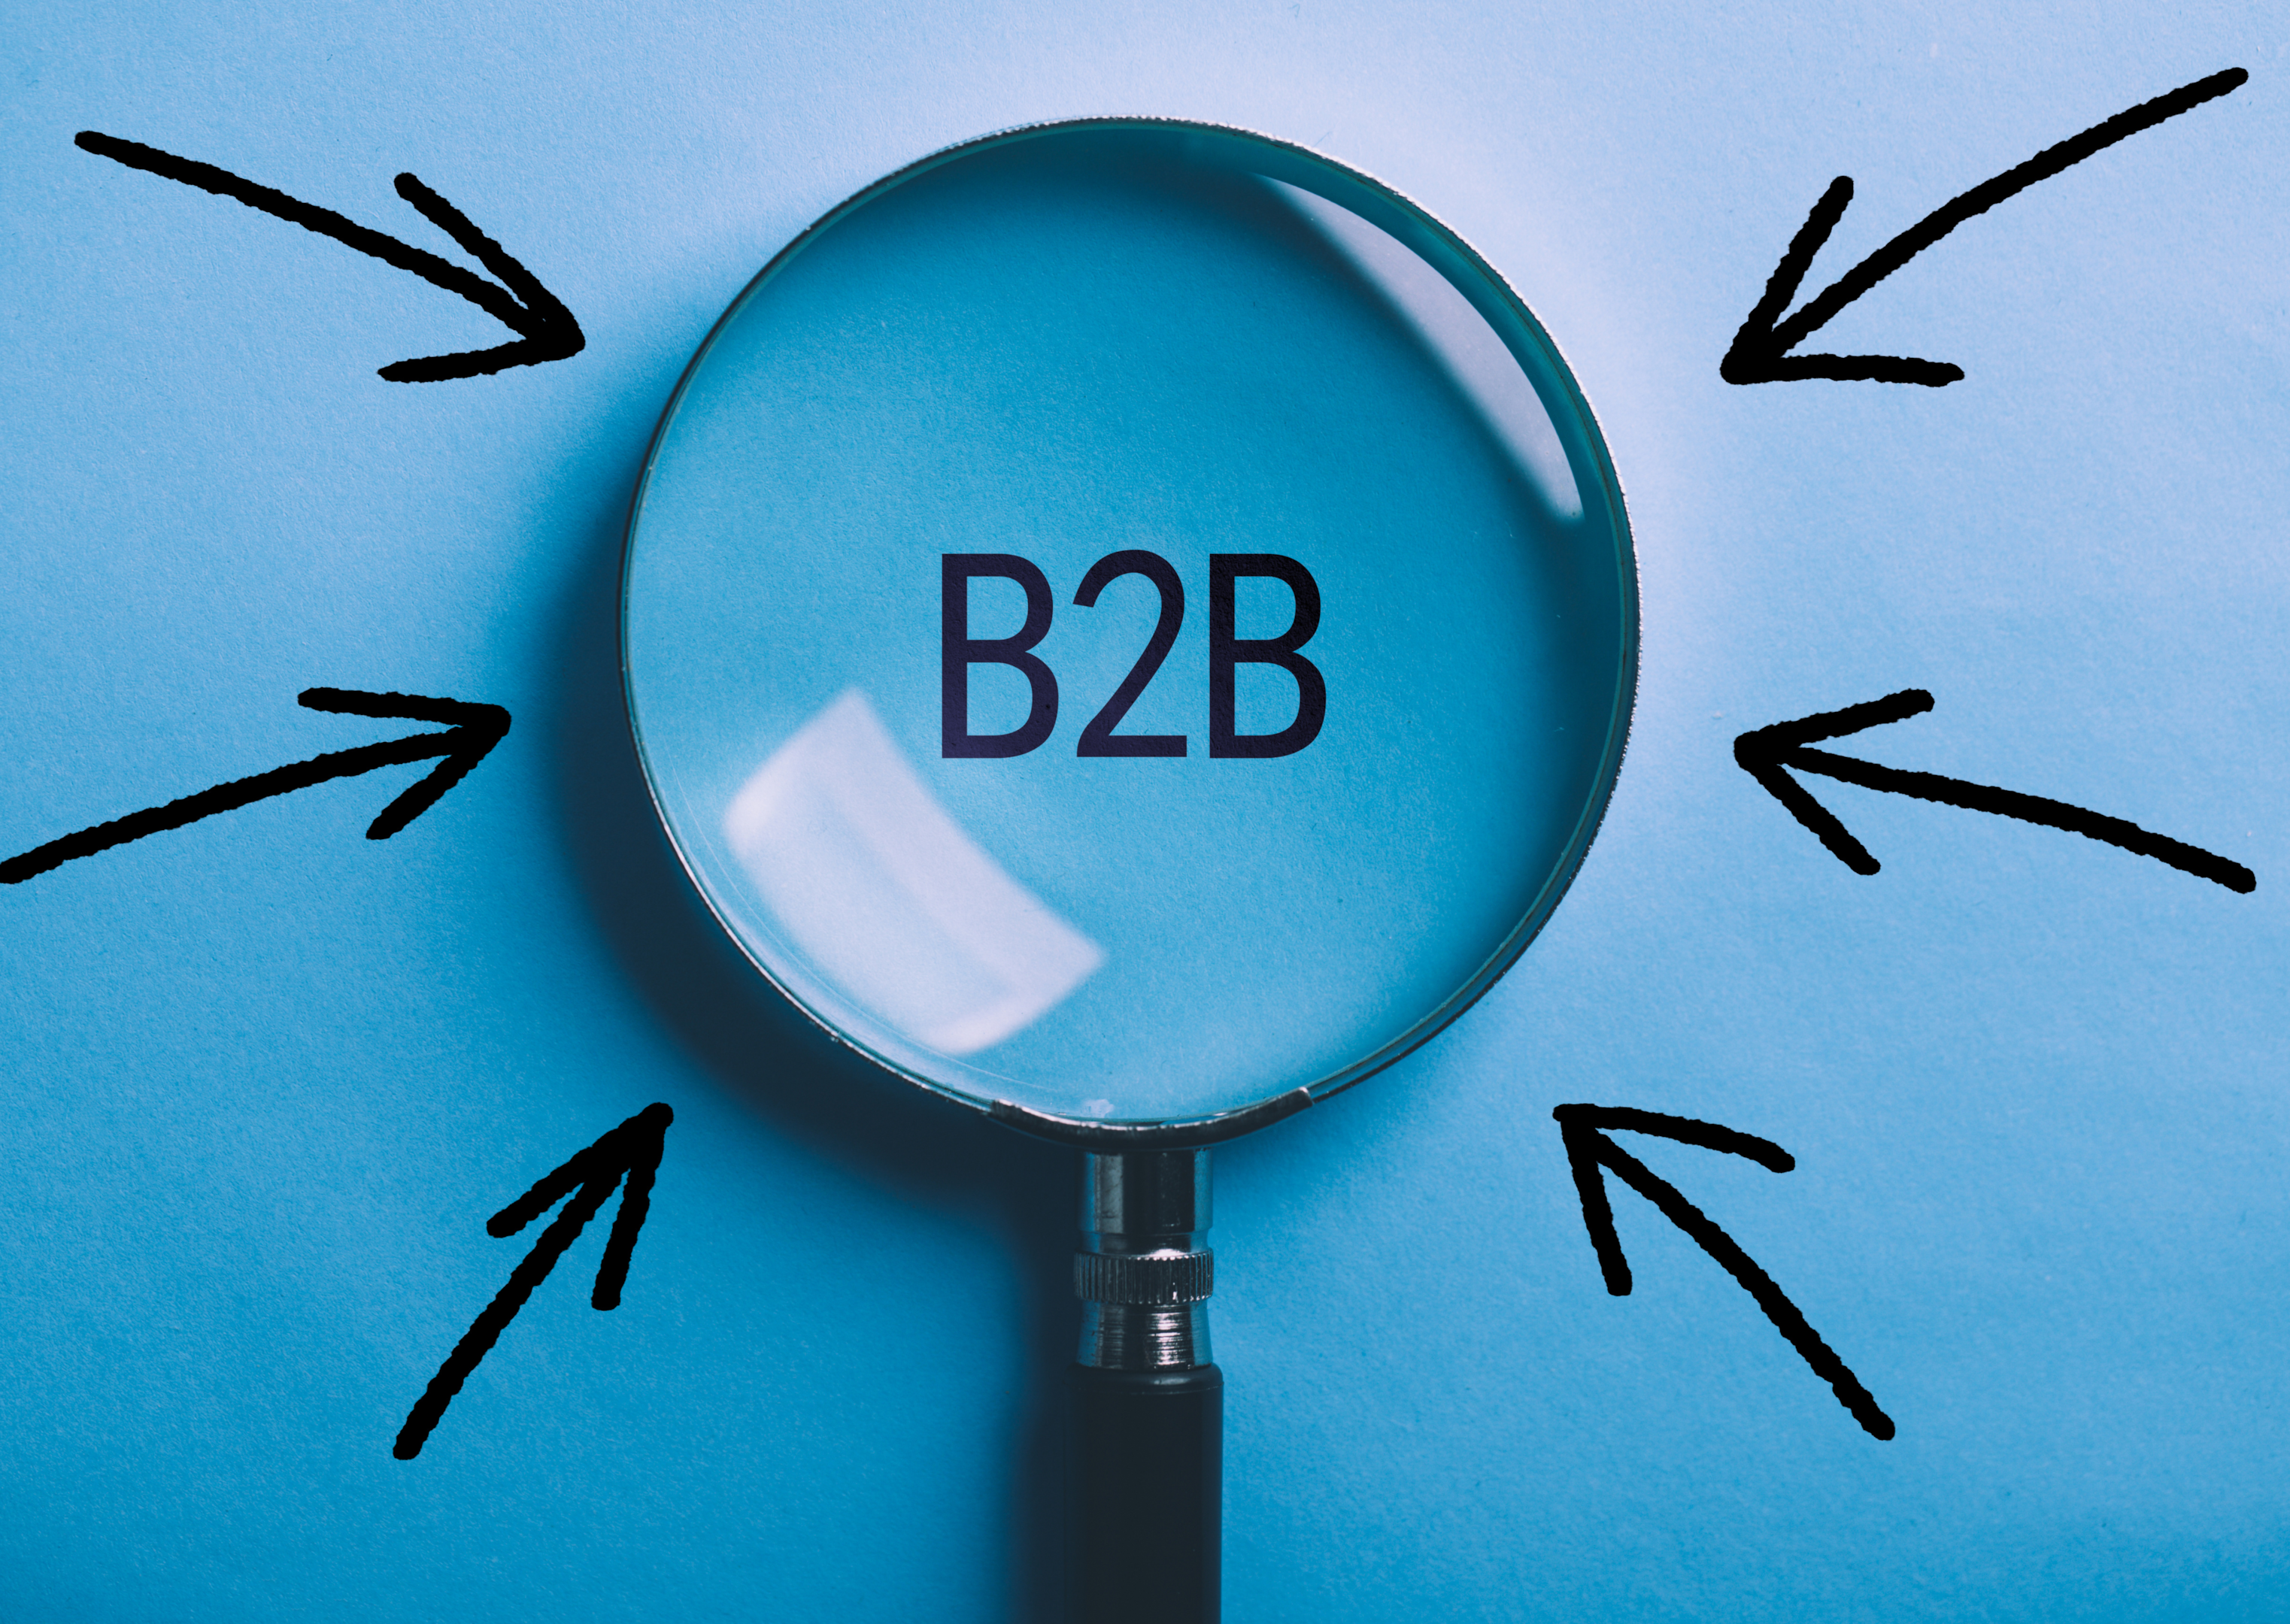 A b2b sales funnel showing how to capture potential clients in a given target market.